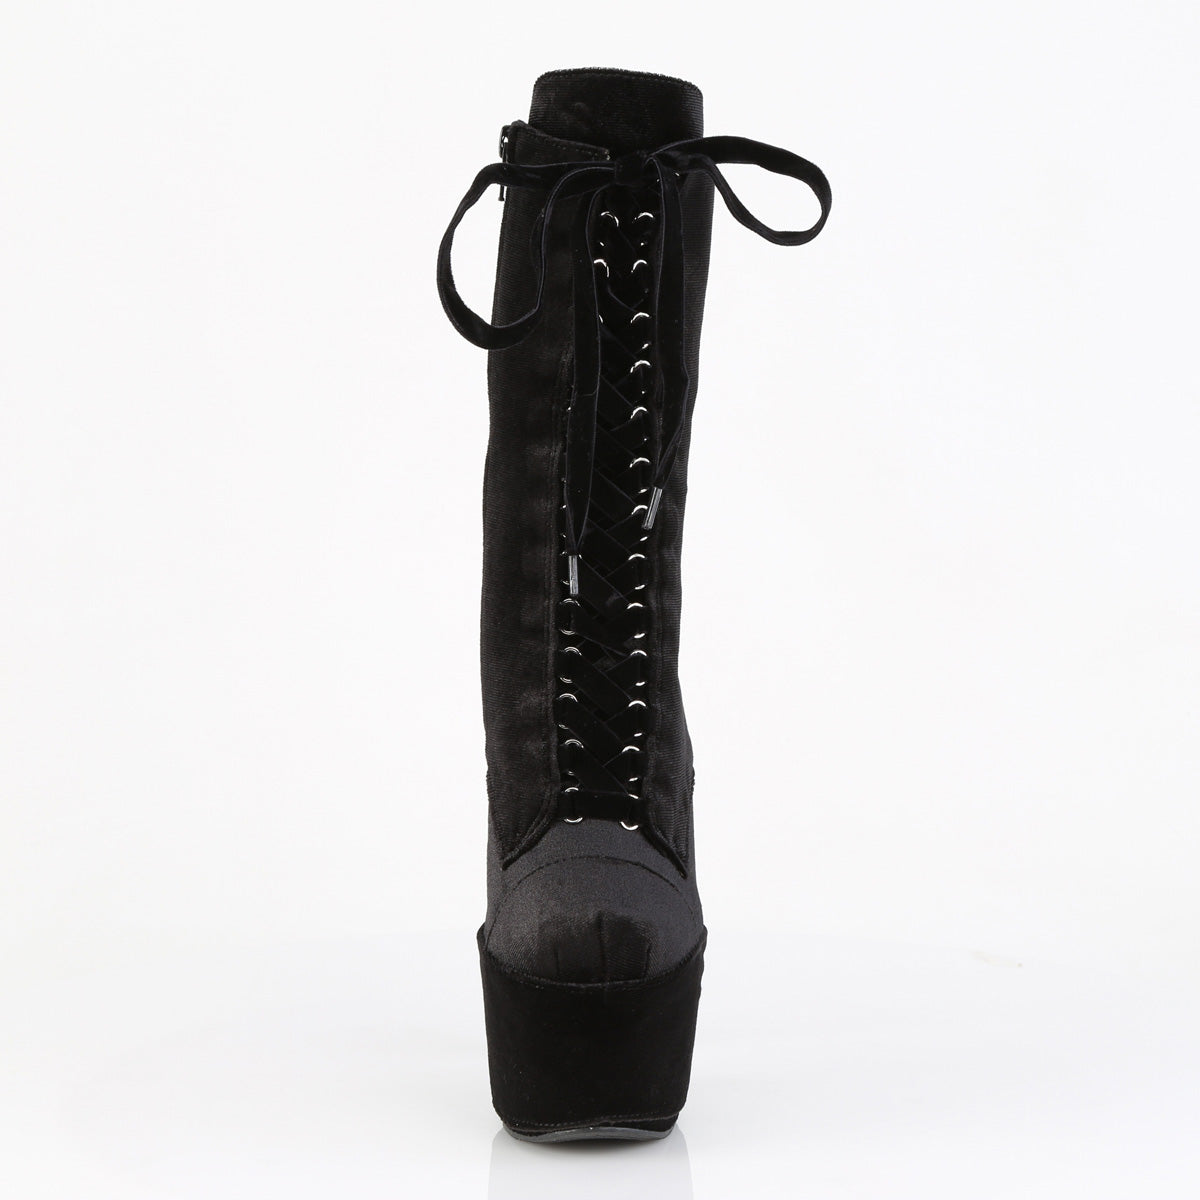 ADORE-1045VEL Velvet Lace-Up Ankle Boot Black Multi view 5